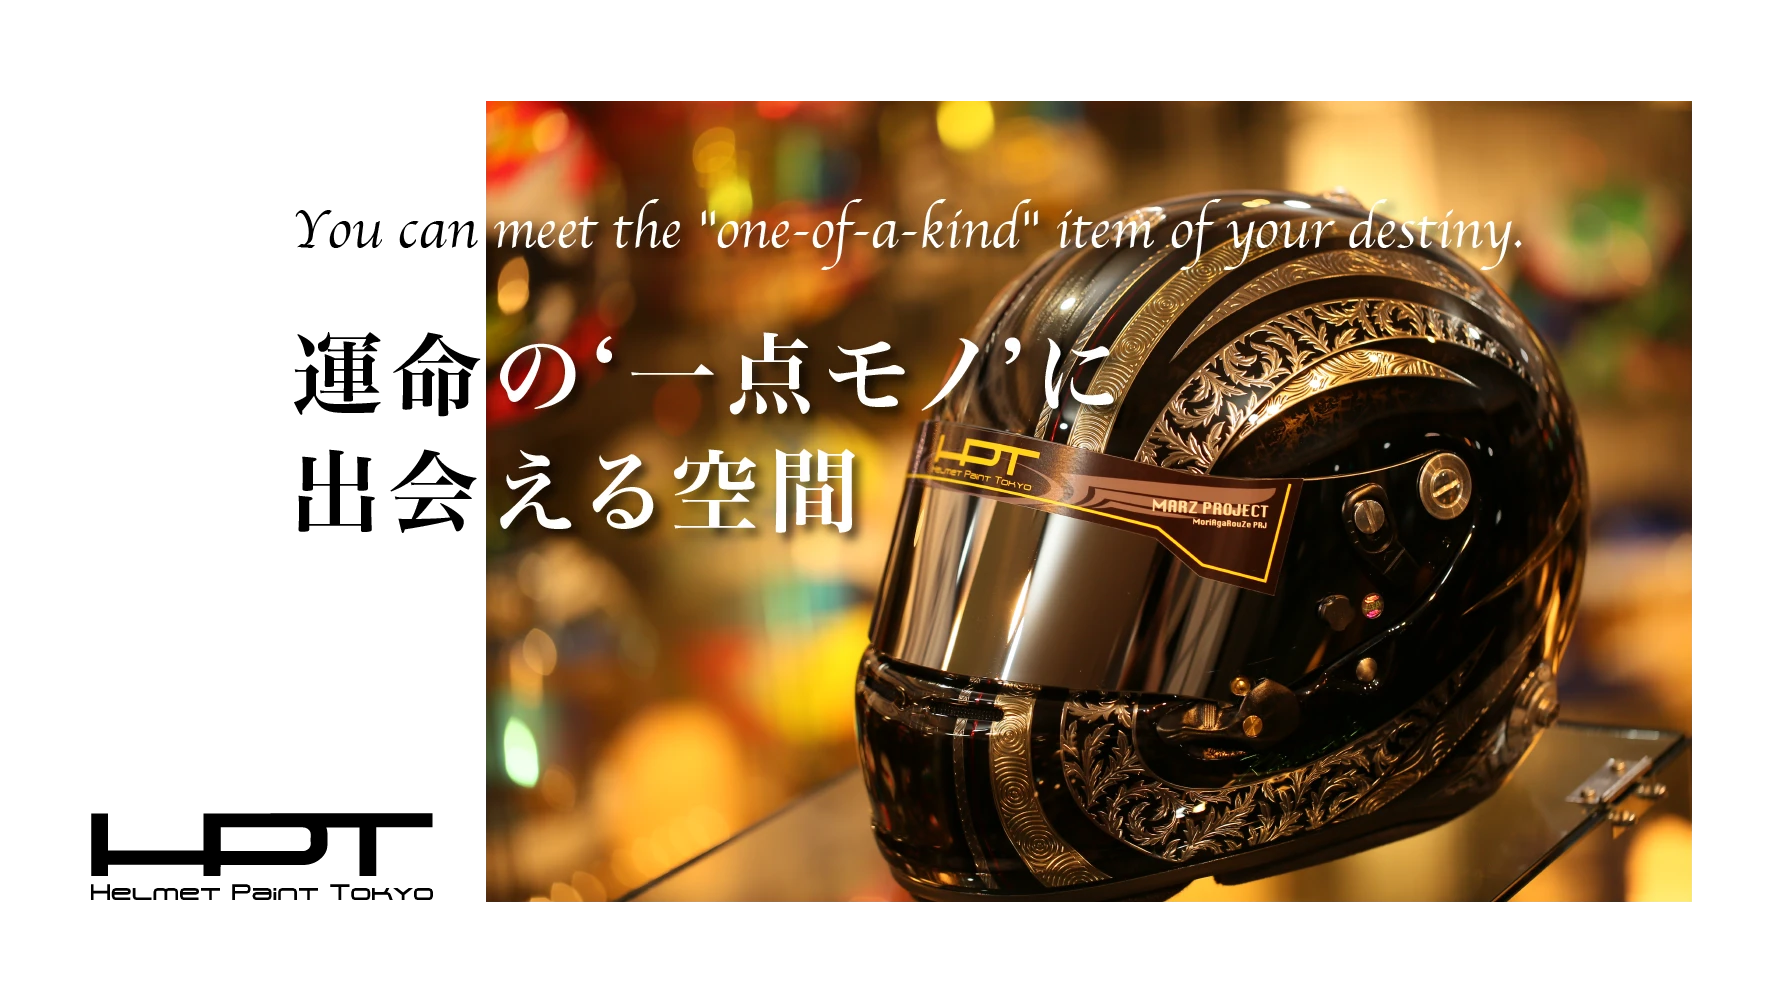 You can  meet the 'one-of-a-kind' item of your destiny. 運命の'一点モノ'に出会える空間